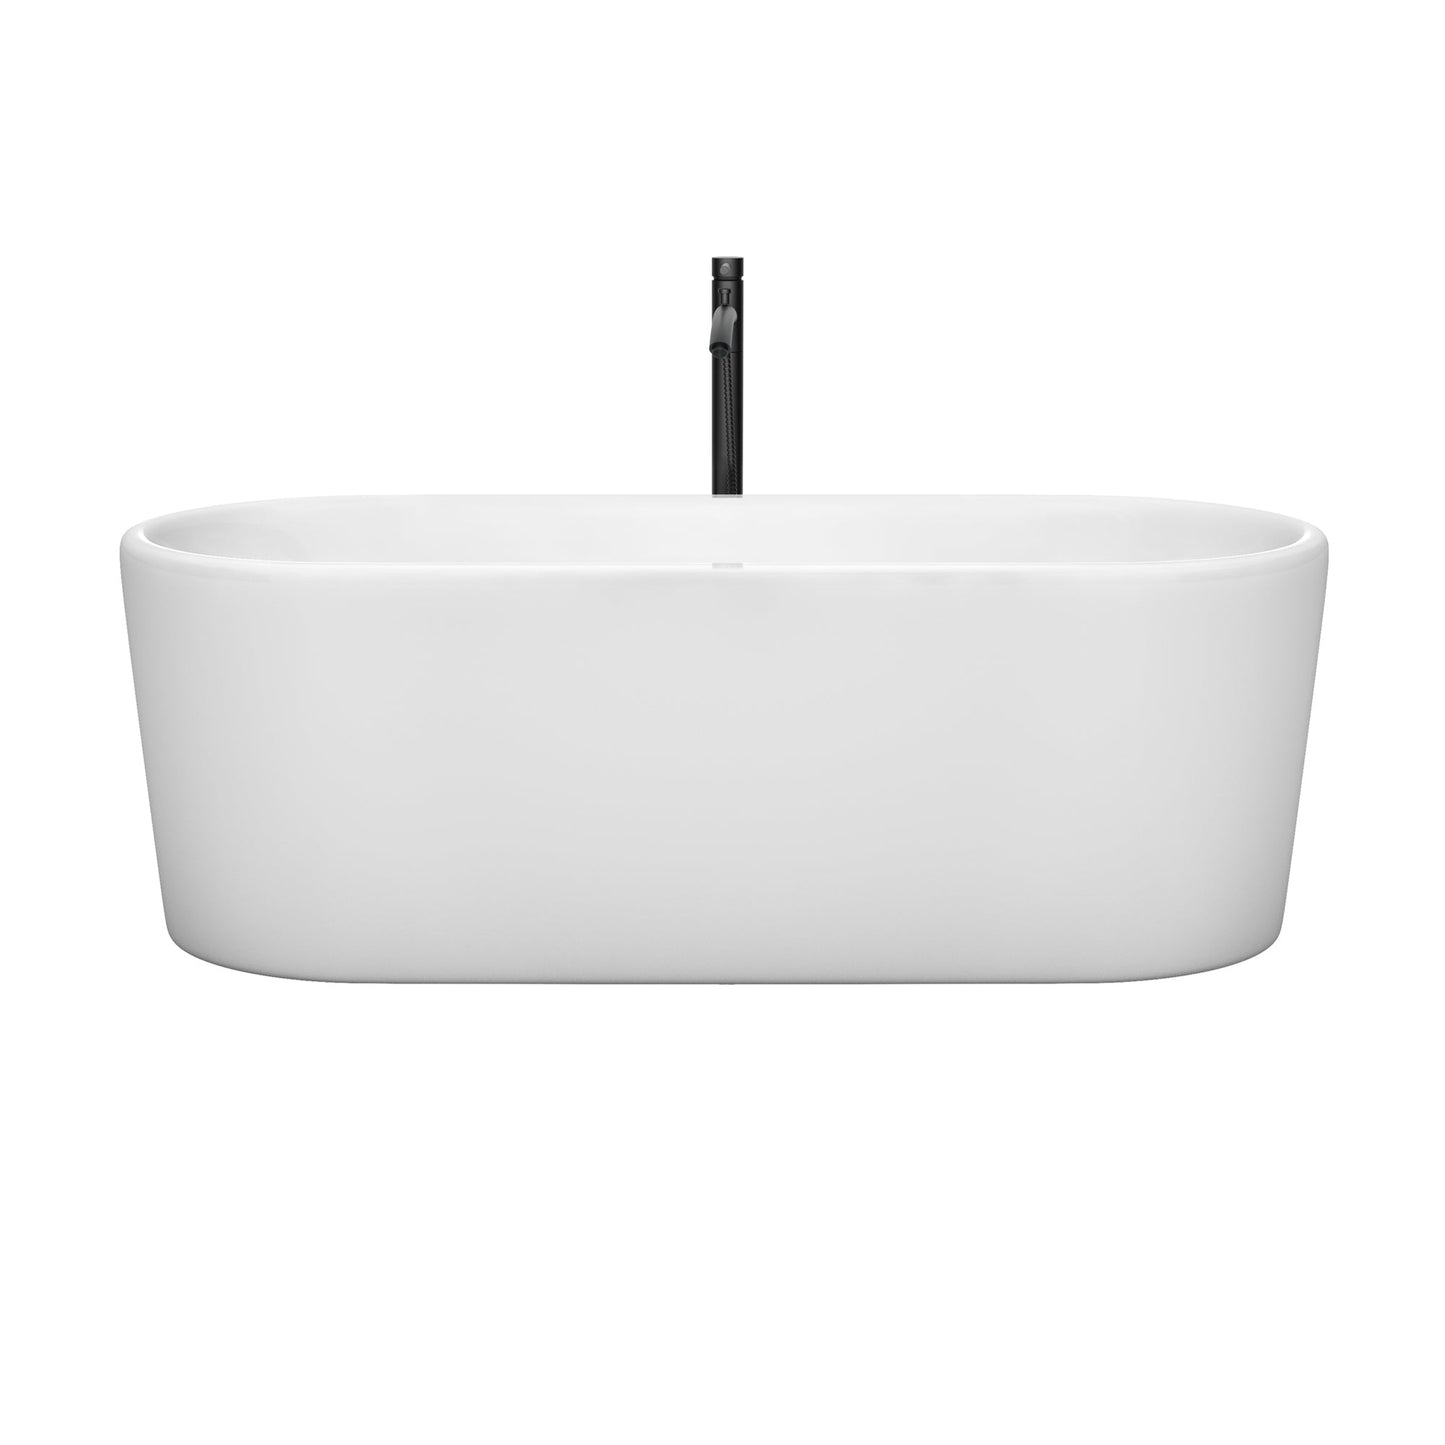 Wyndham Collection Ursula 67" Freestanding Bathtub in White With Shiny White Trim and Floor Mounted Faucet in Matte Black